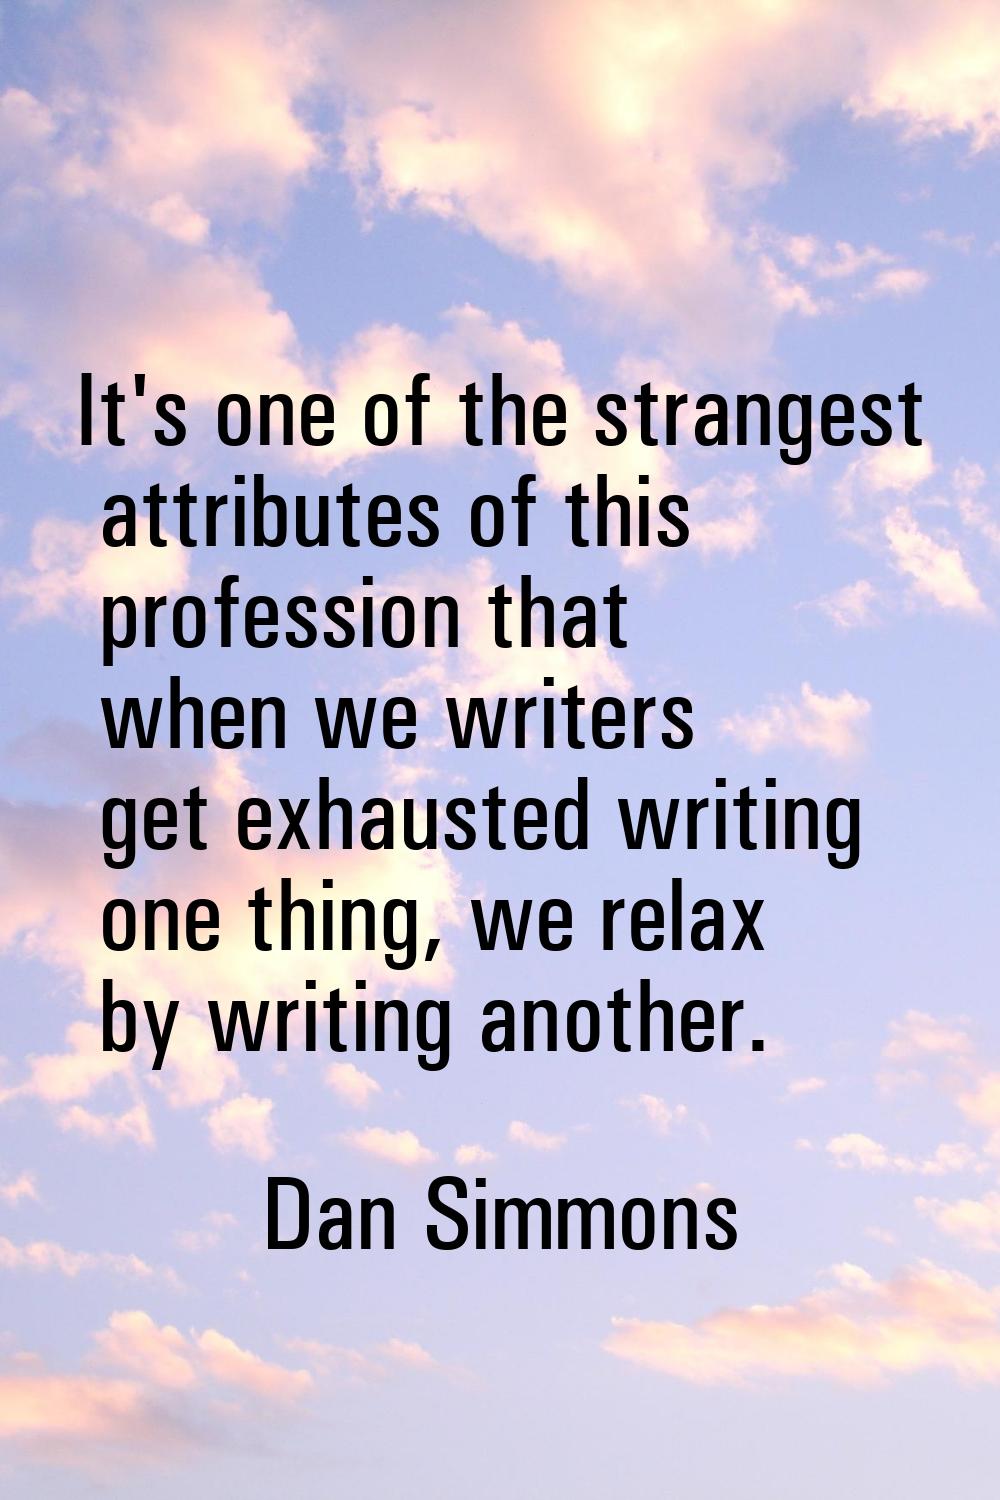 It's one of the strangest attributes of this profession that when we writers get exhausted writing 